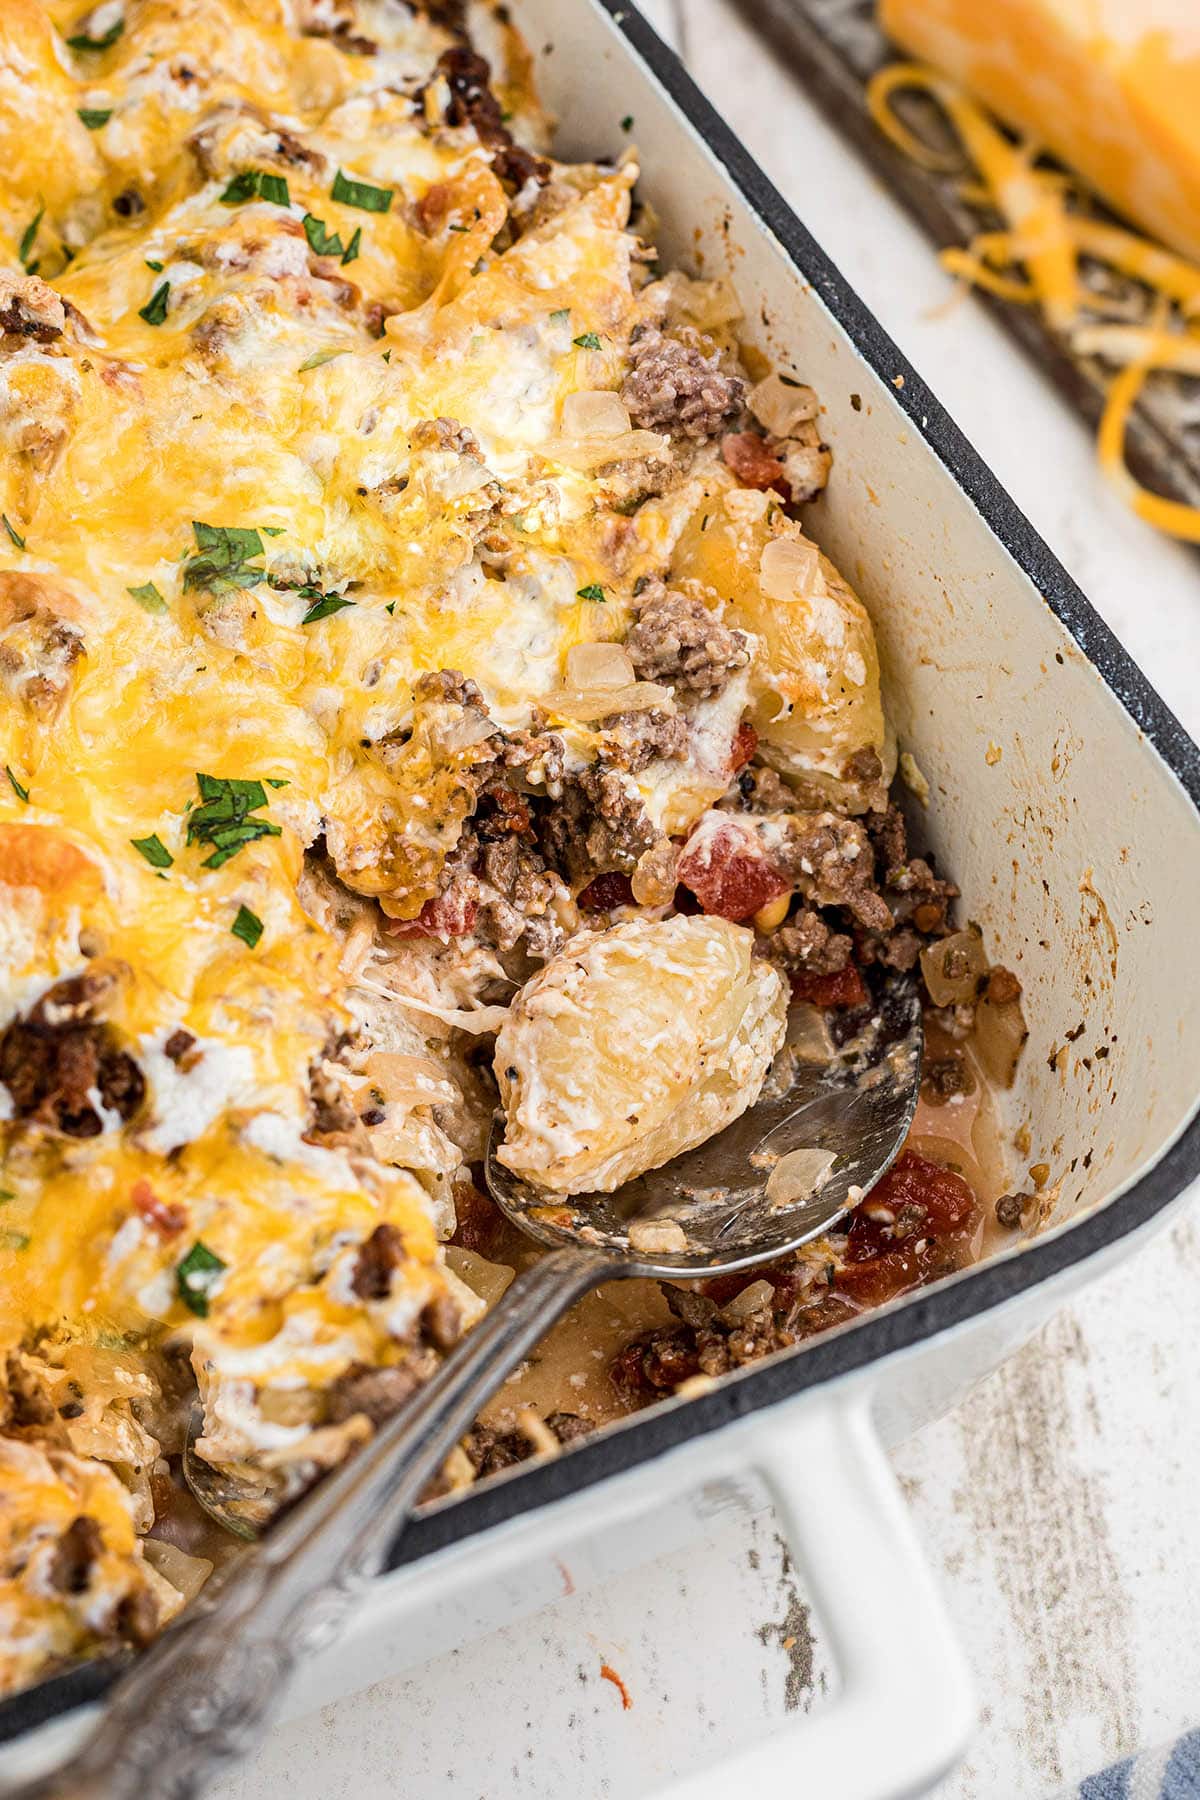 Meaty casserole in baking dish with serving spoon.